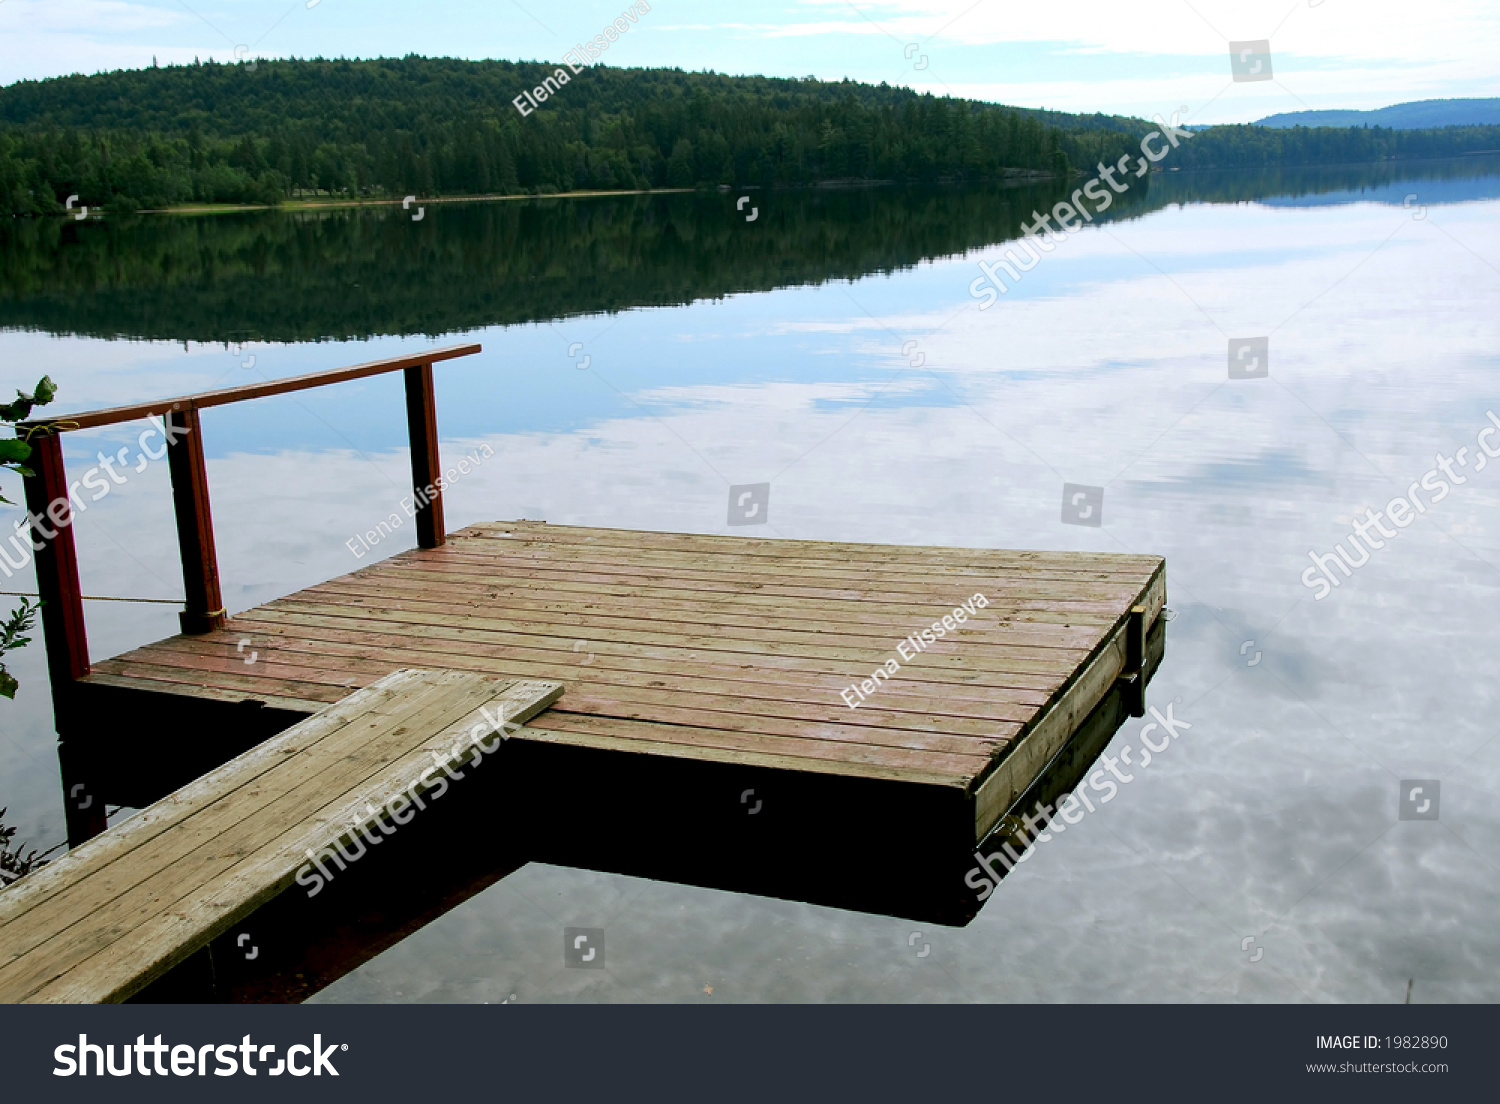 old wooden boat dock on beautiful stock photo 1982890